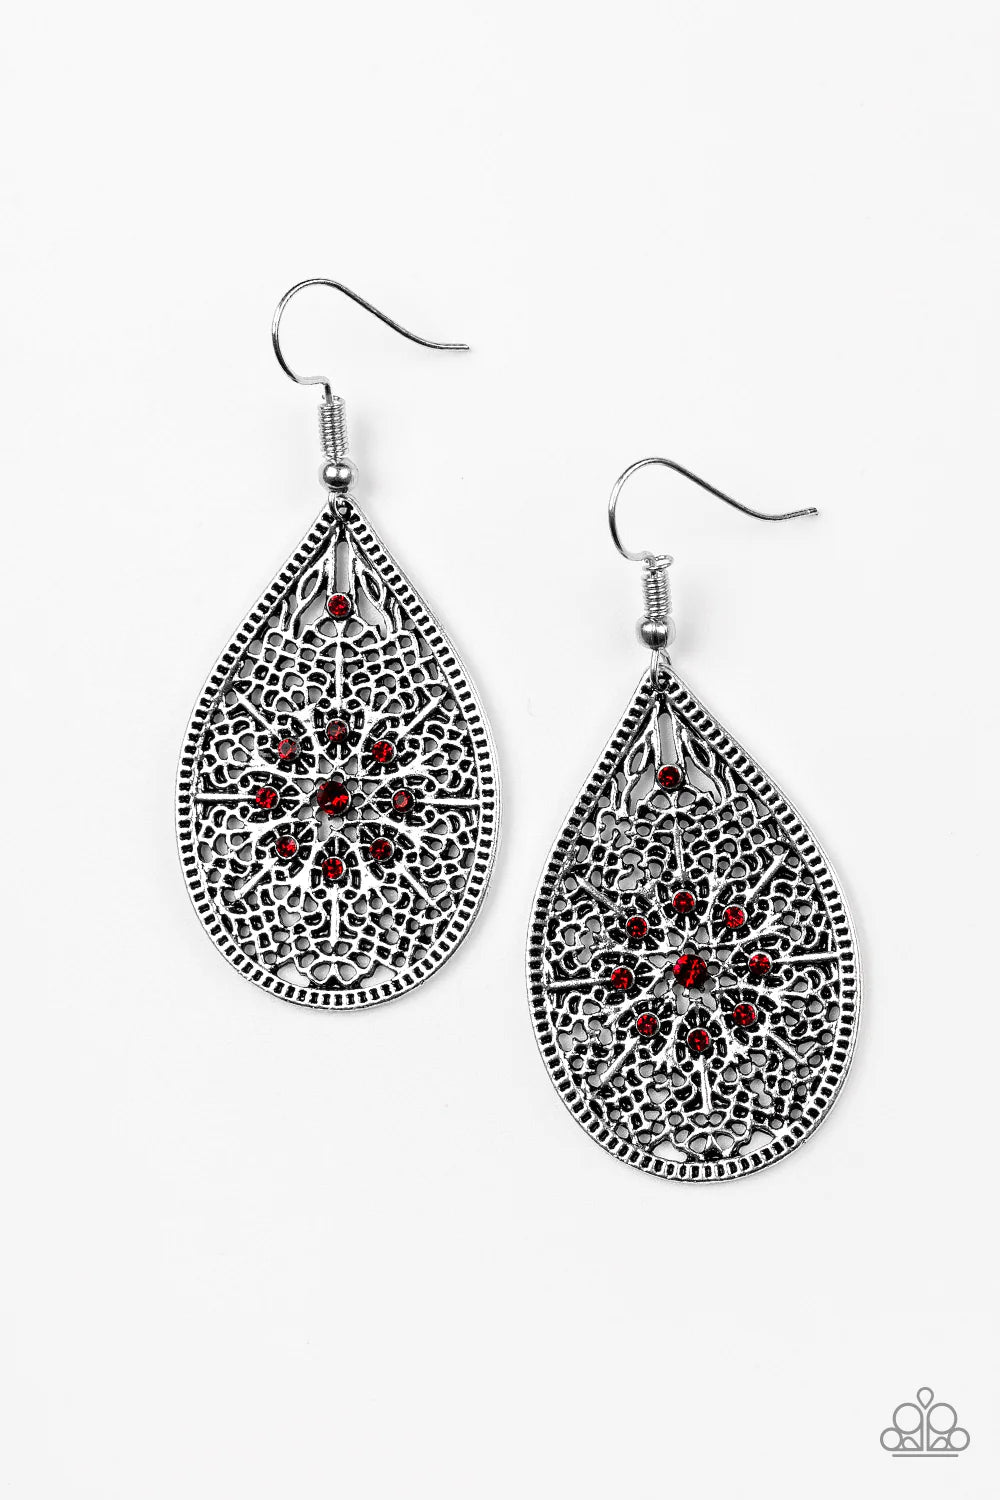 DINNER PARTY POSH - RED EARRING